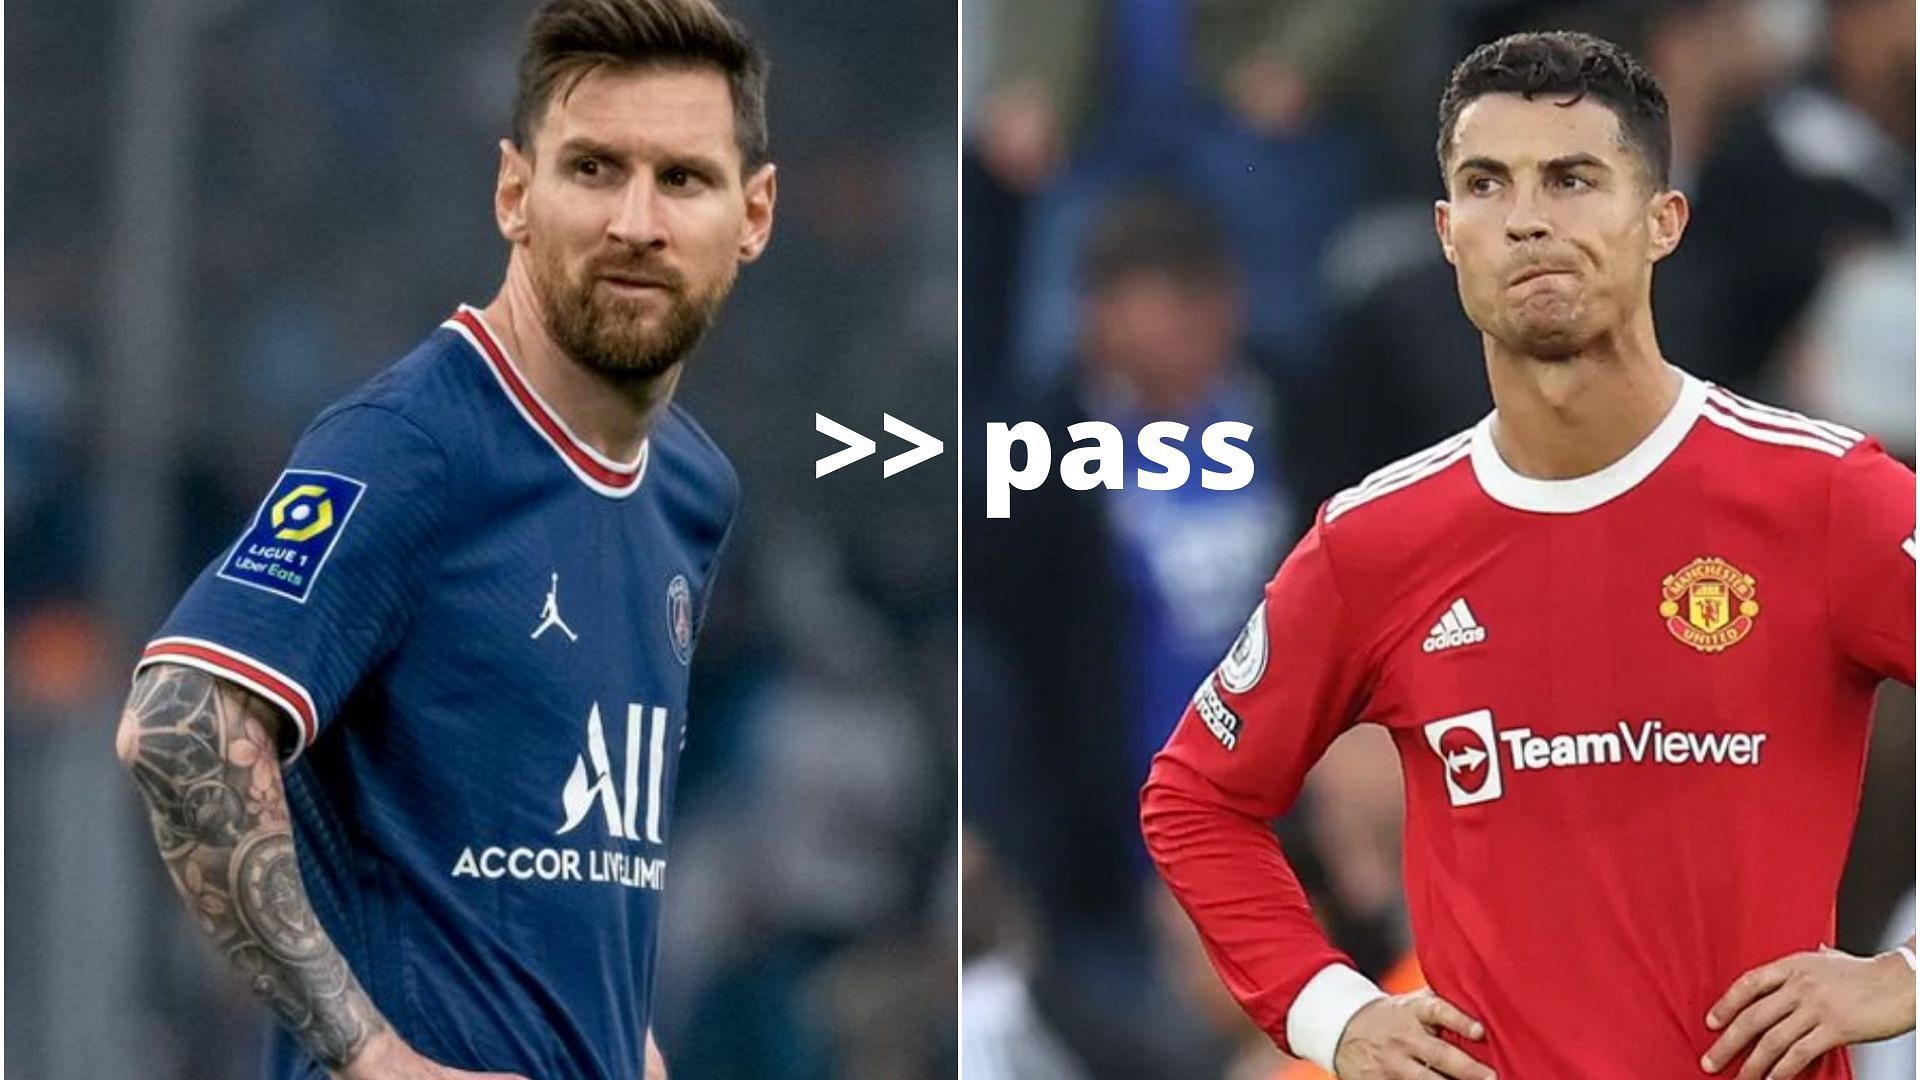 Lionel Messi is one of the few who have better short pass stats than Cristiano Ronaldo in FIFA 22 (Image via Sportskeeda)